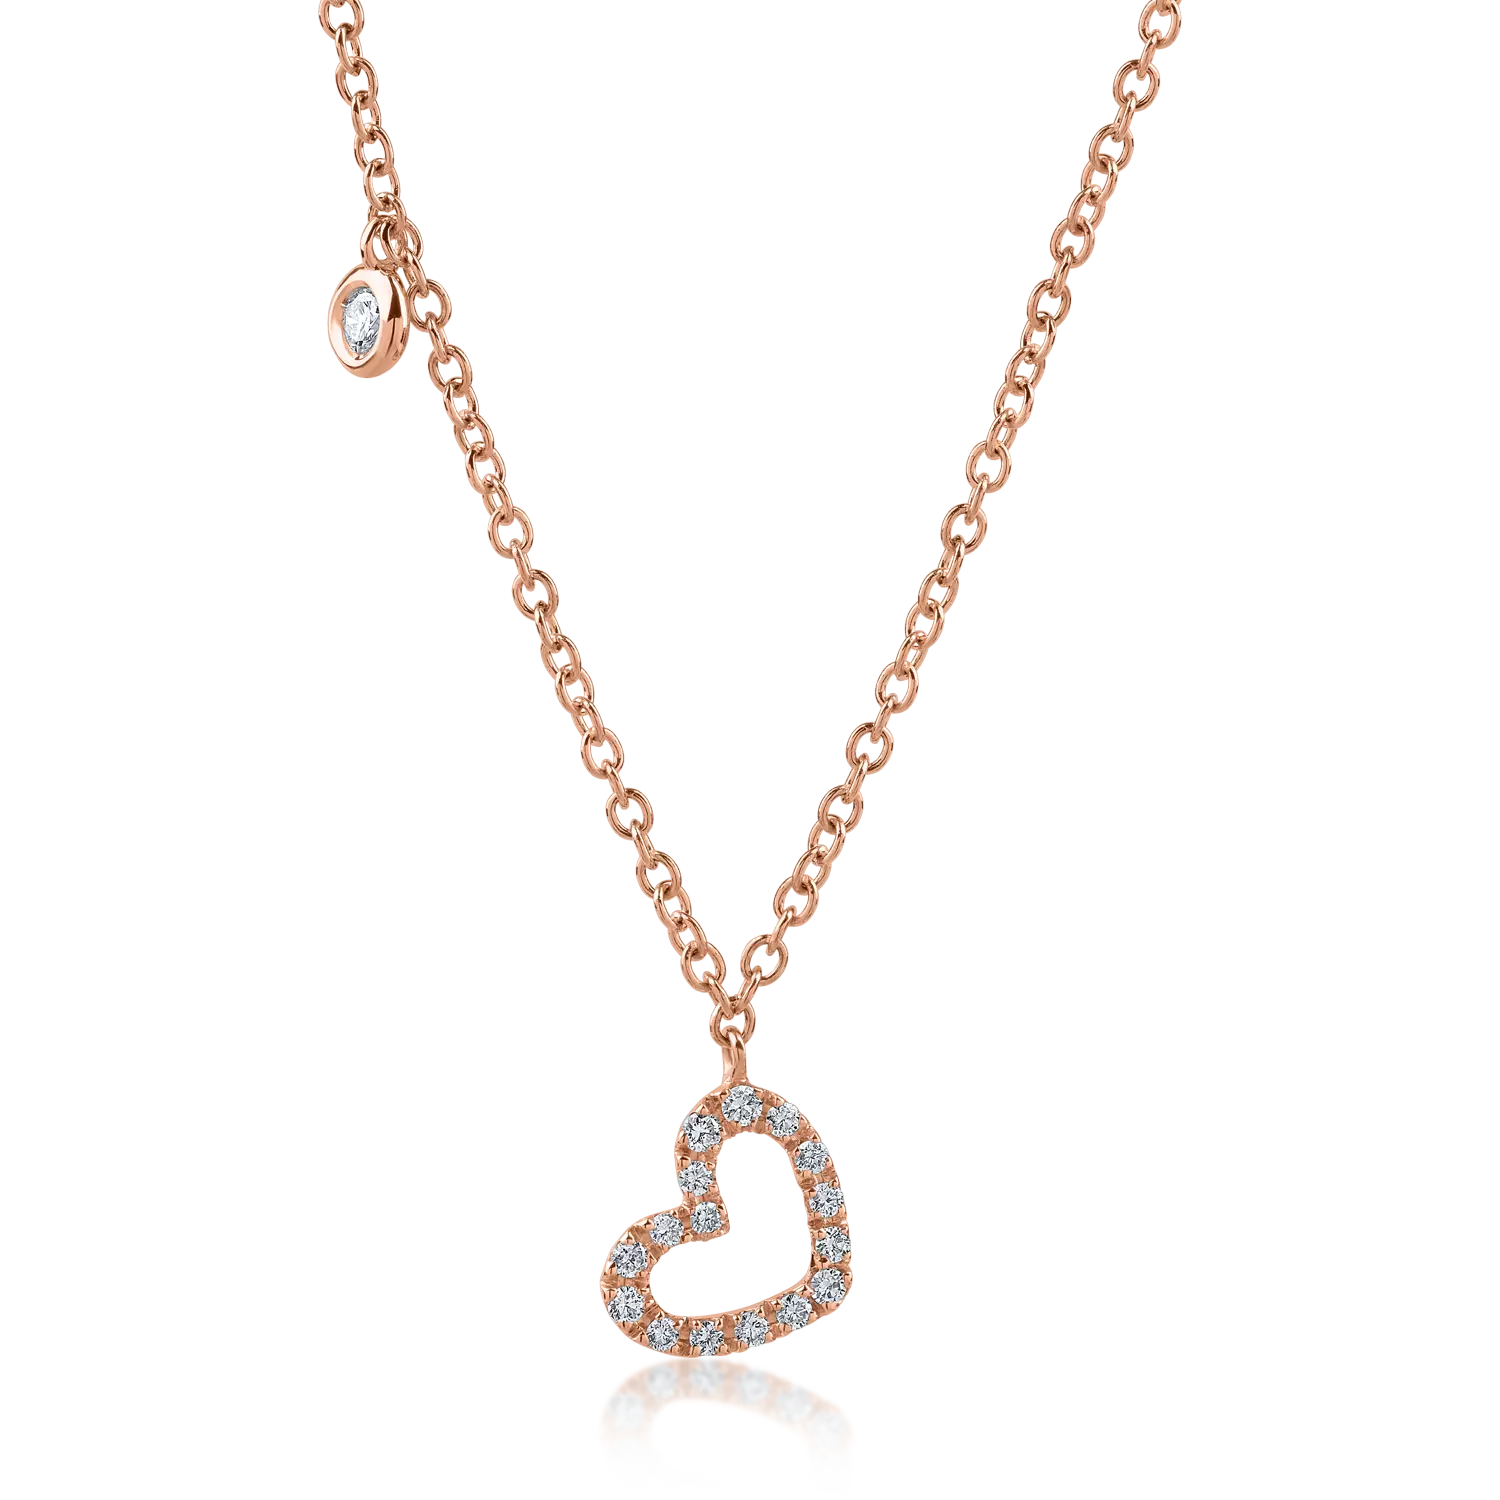 Rose gold heart pendant necklace with 0.11ct diamonds